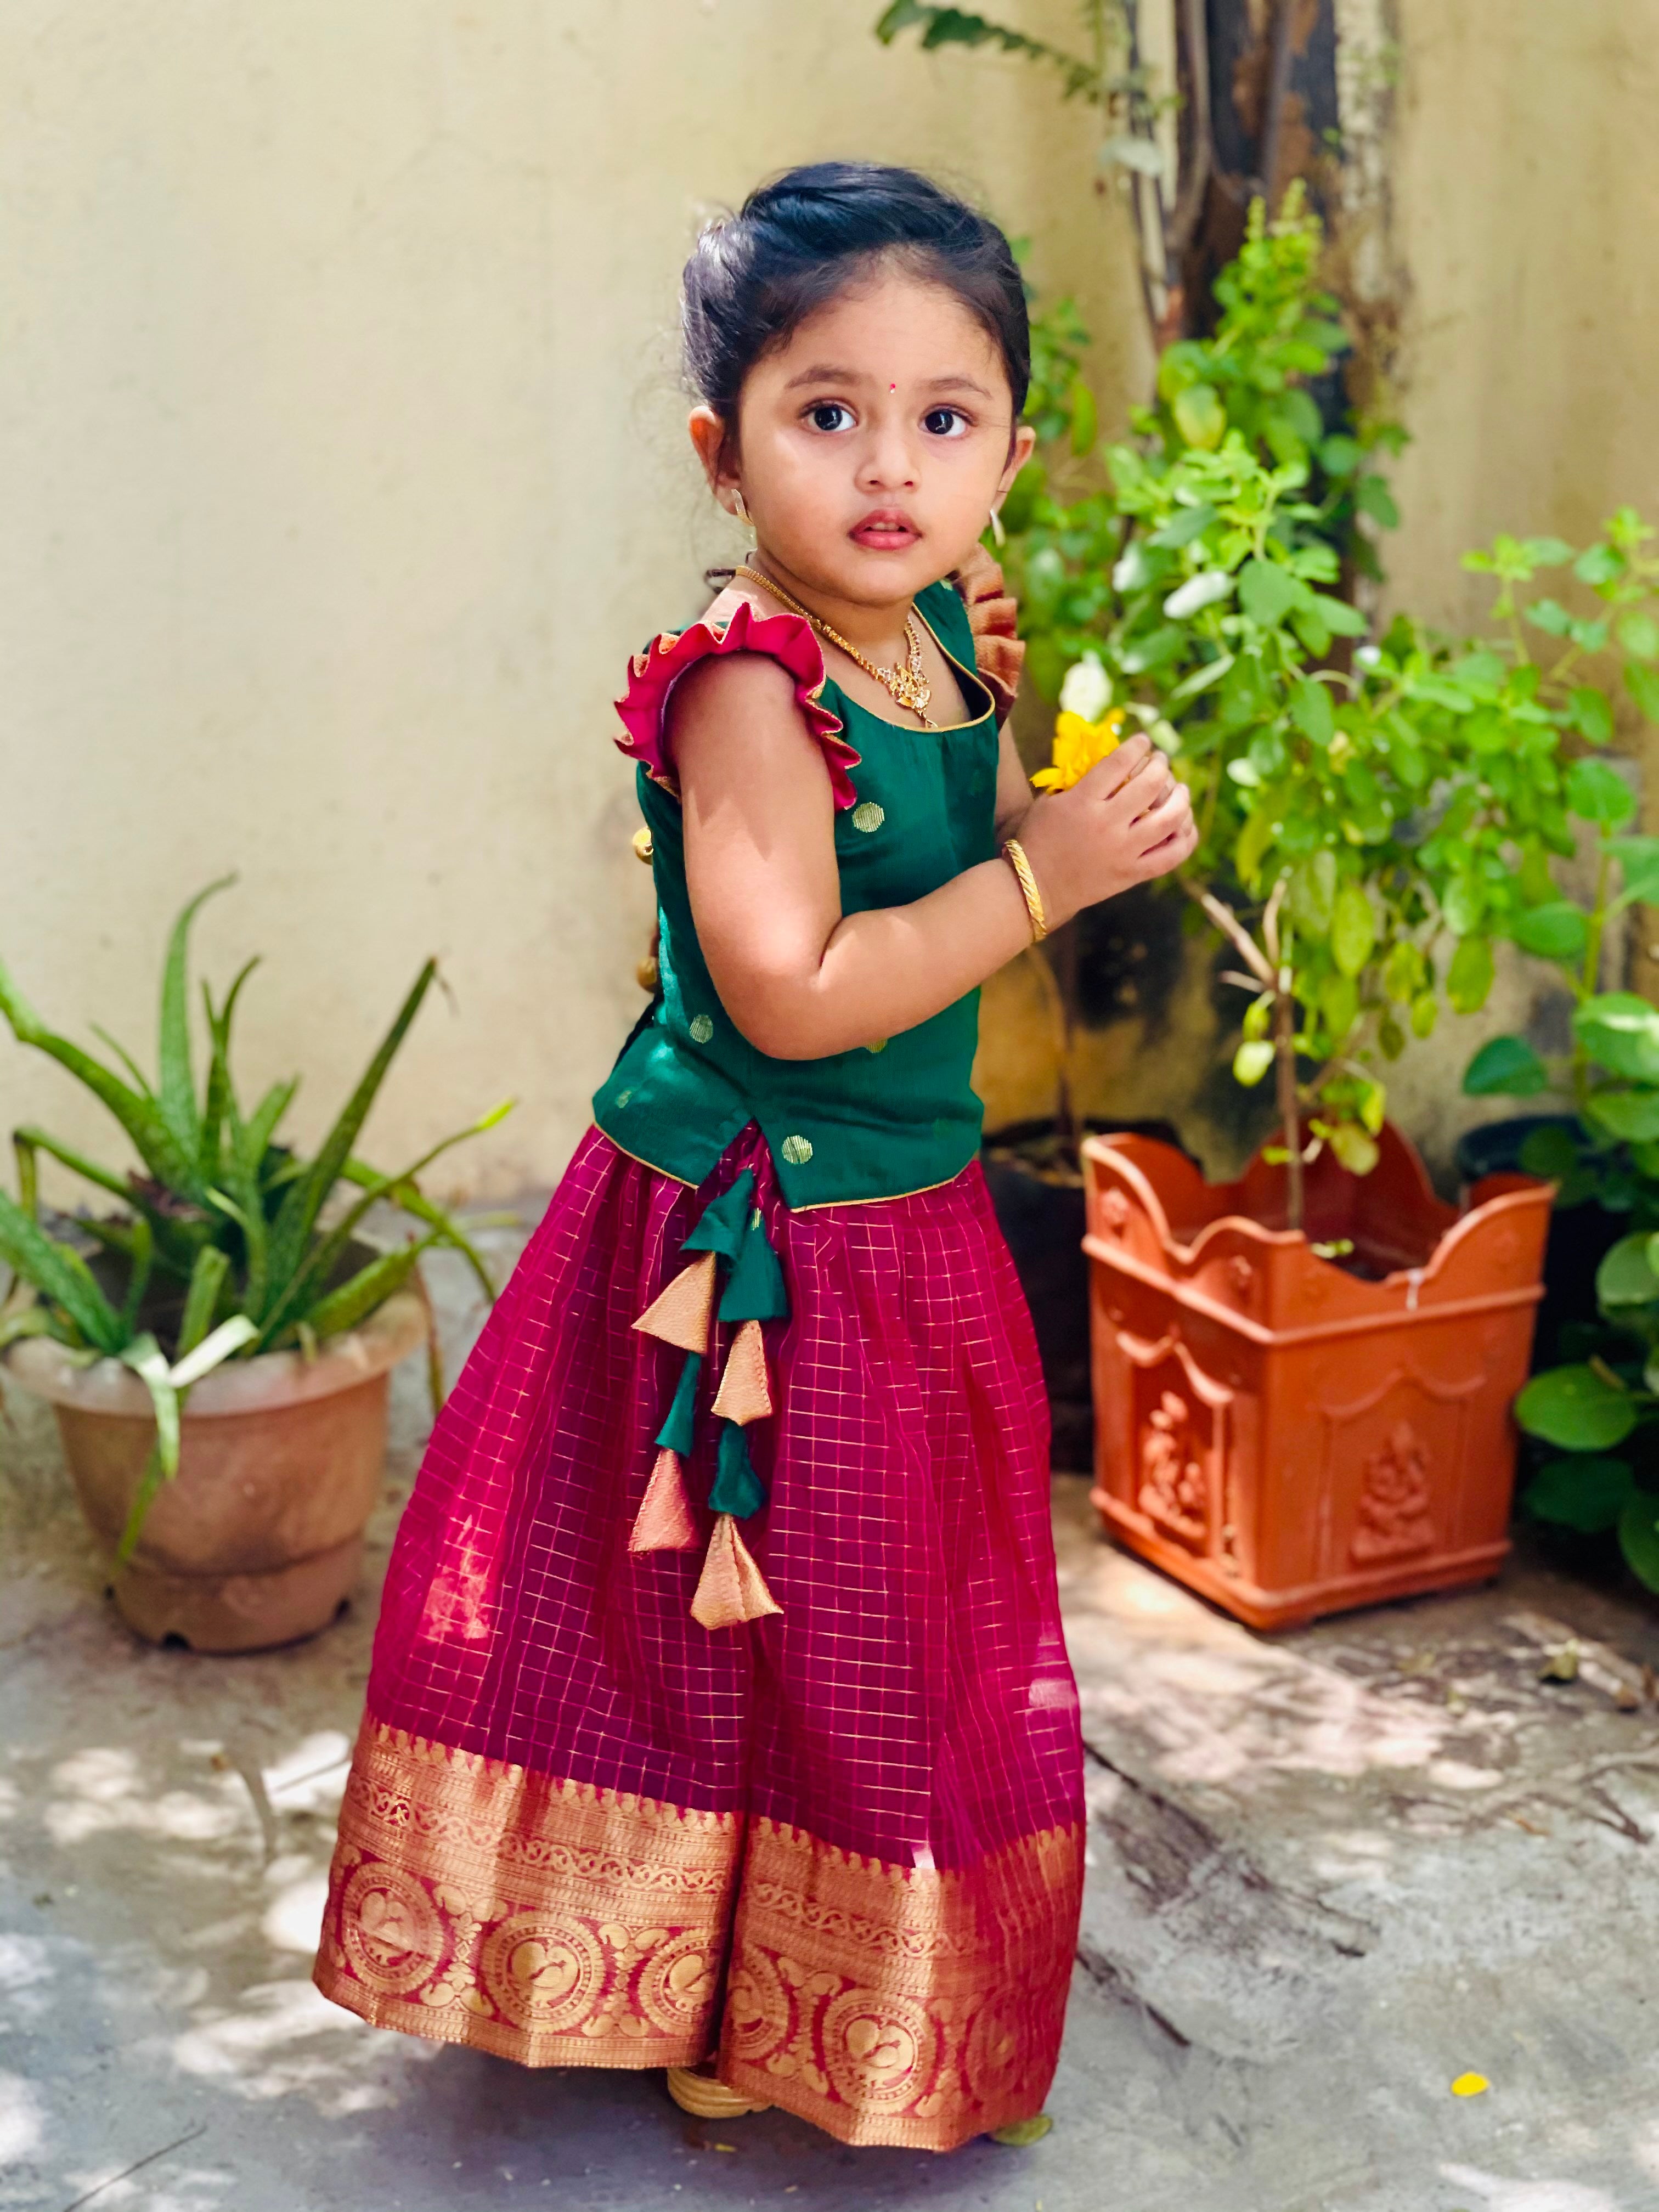 Shop green and pink traditional Pattu Pavadai for girls. Get the perfect south Indian dress for girls and find the perfect design with zari checks and colors. Shop online for cotton and designer baby clothes with Ekanta studio now!